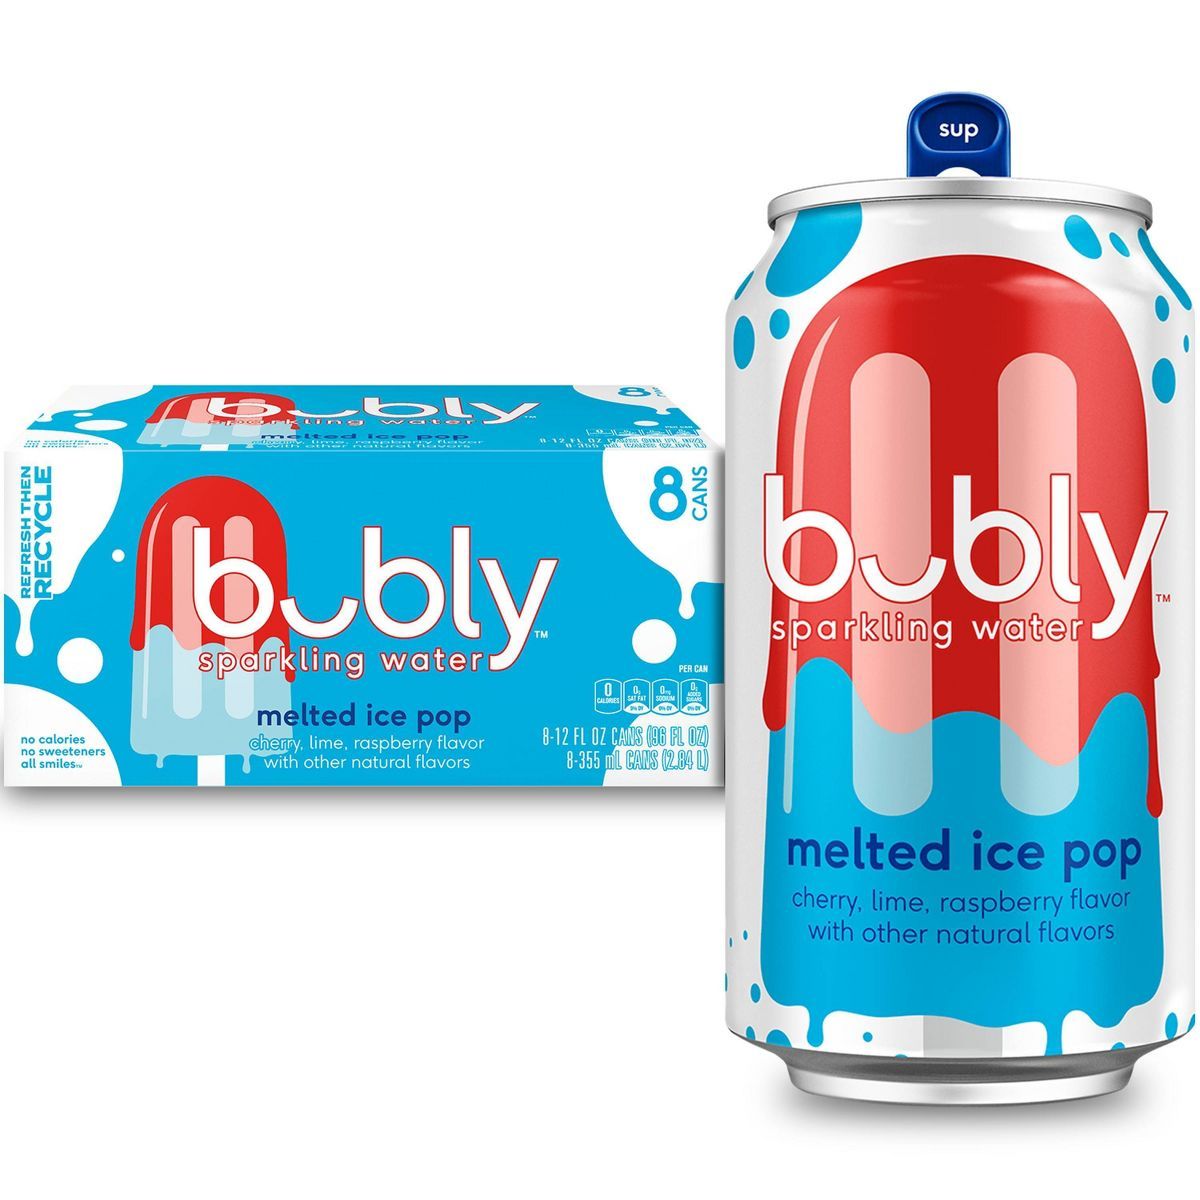 bubly Melted Ice Pop Sparkling Water - 8pk/12 fl oz Cans | Target